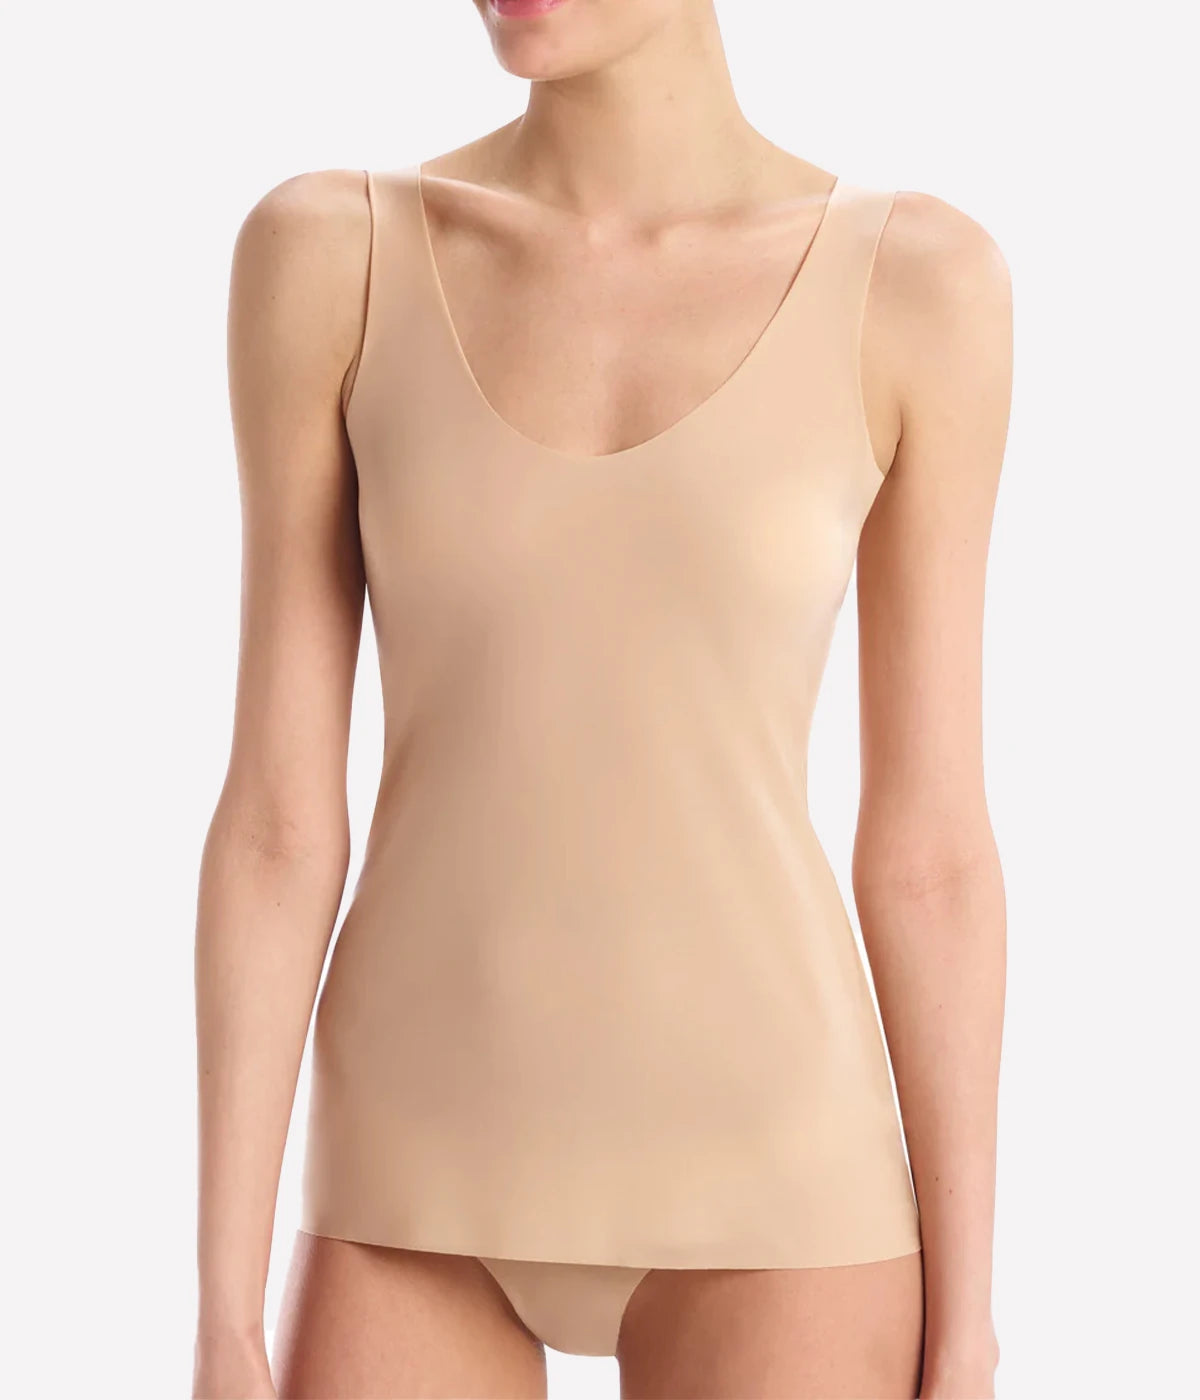 The Whisper Weight Cami is the lightweight layer you'll wear with everything or as a tight-fitting second layer. Constructed with a breathable European microfiber that disappears against the skin, finished with raw-cut edges that lay flat against the body for a seamless look, in a neutral beige colour. Everyday wear or underwear.